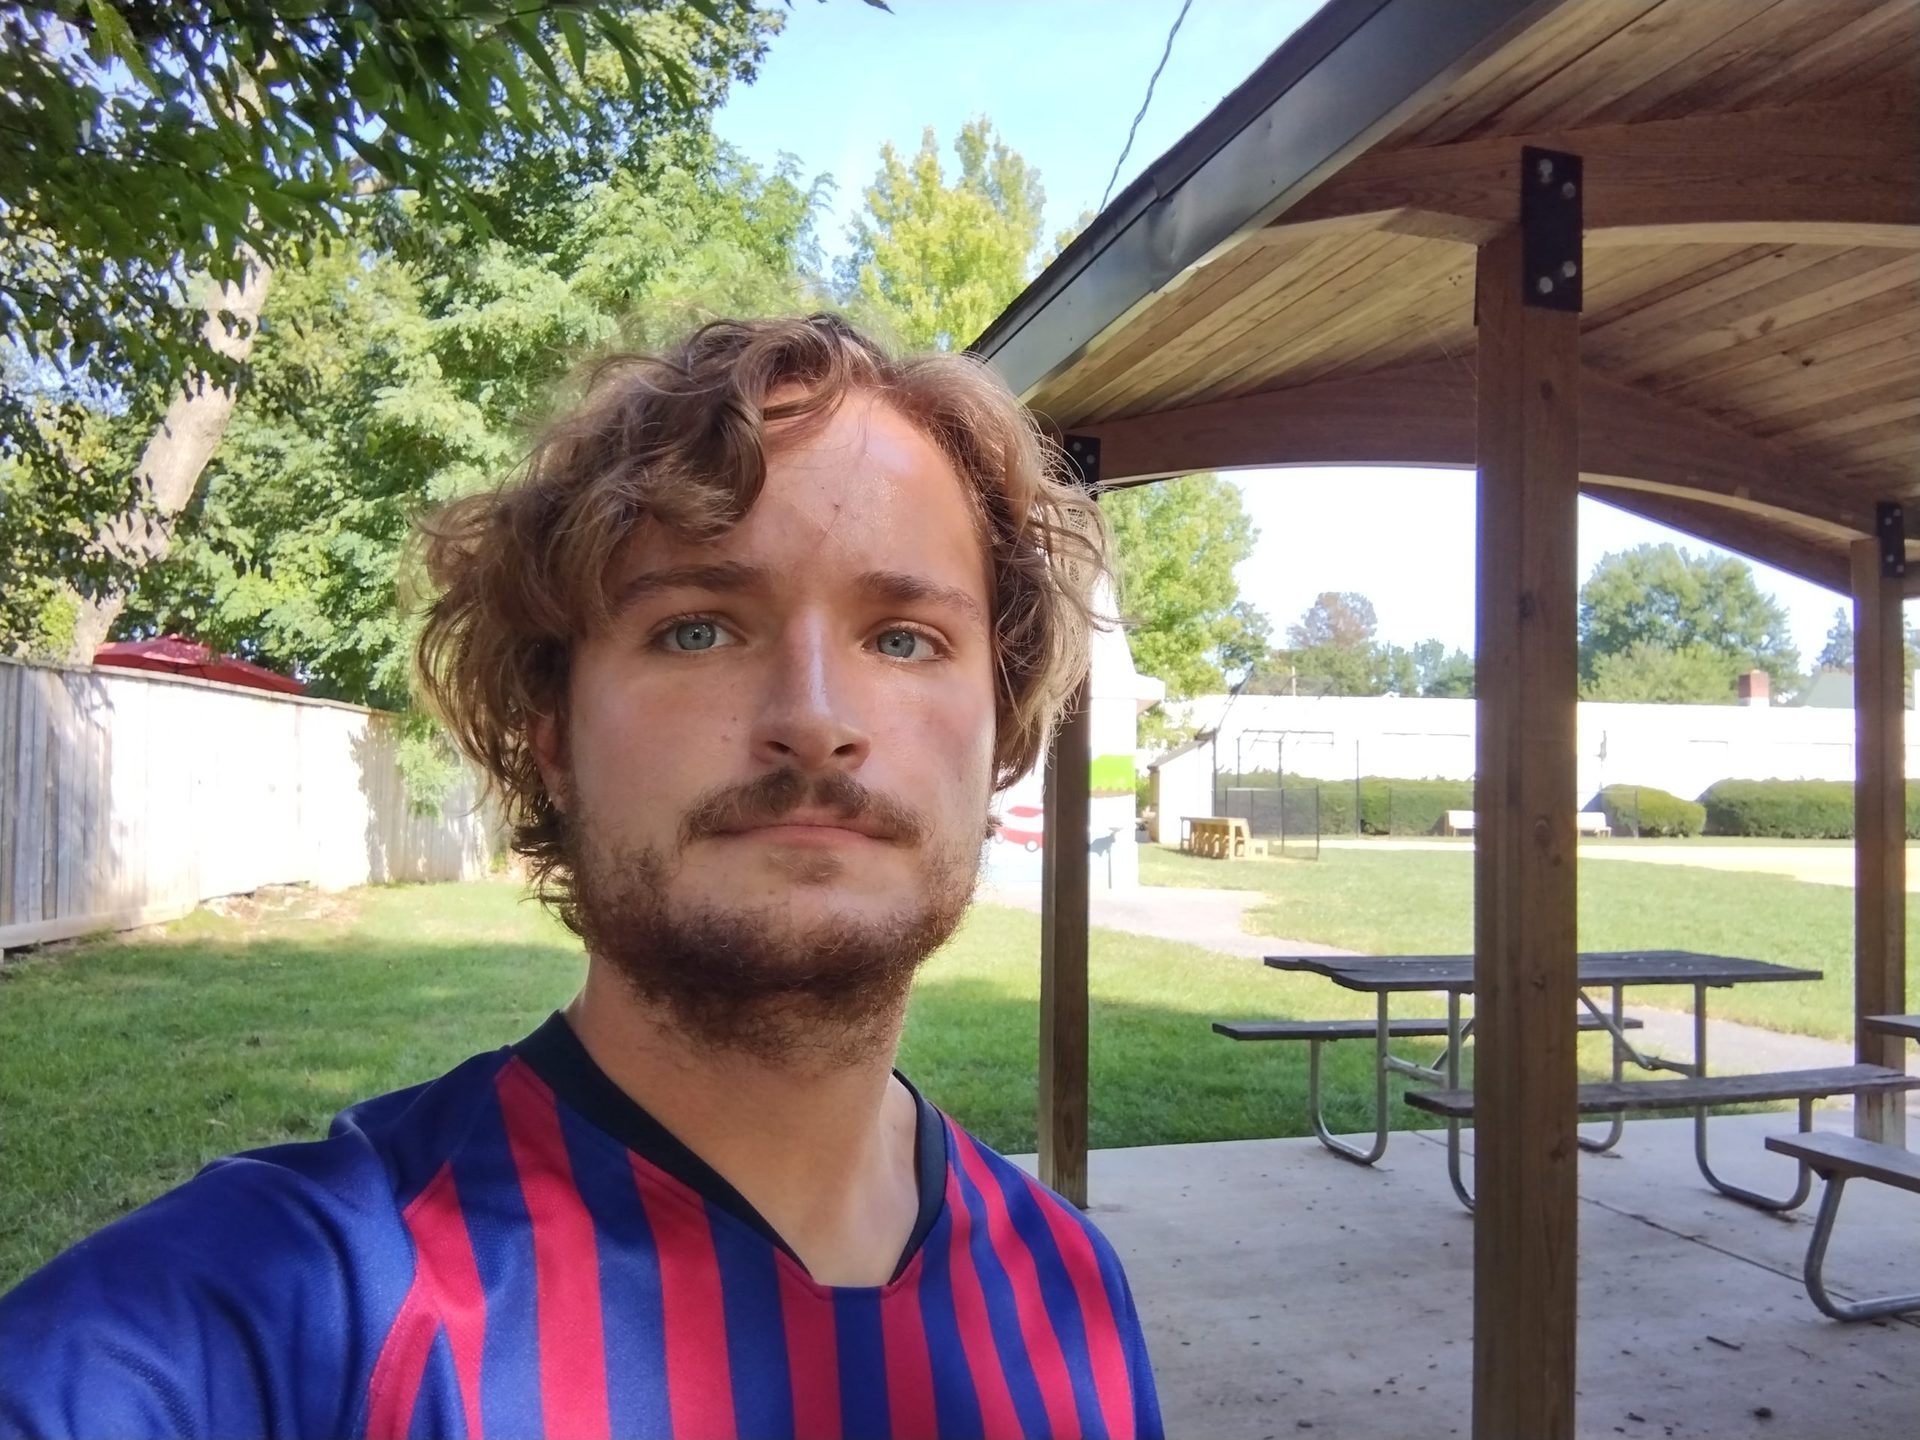 Motorola Moto G Power standard selfie of a man with light curly hair and facial hair wearing a blue and red striped top